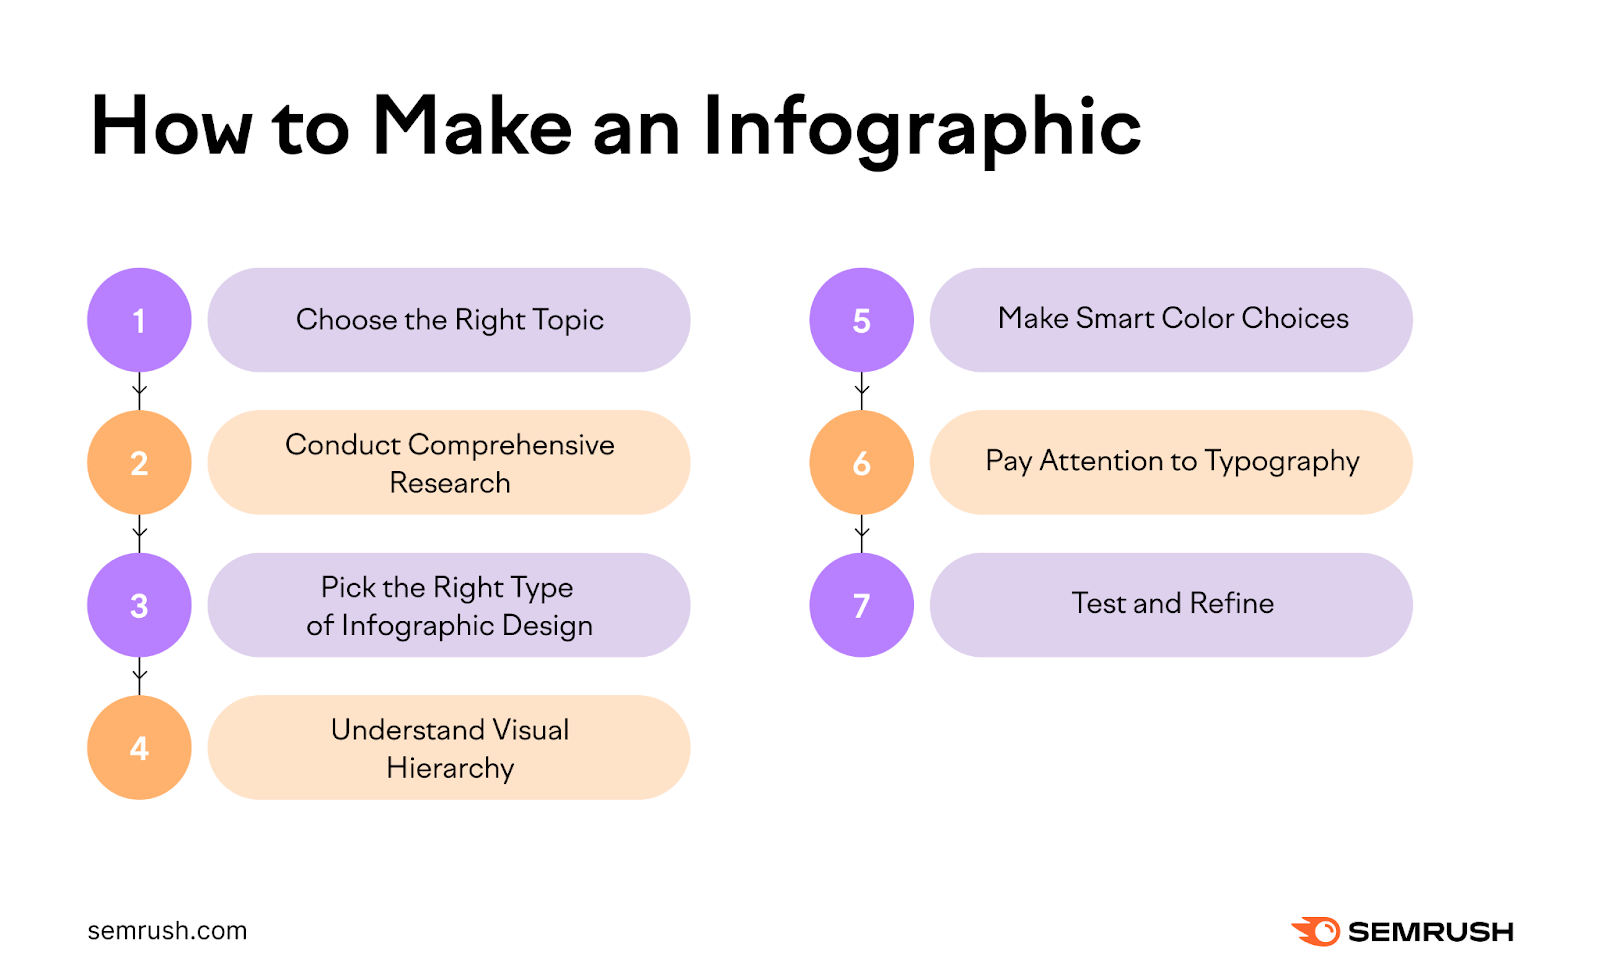 Semrush's infographic listing the steps for how to make an infographic